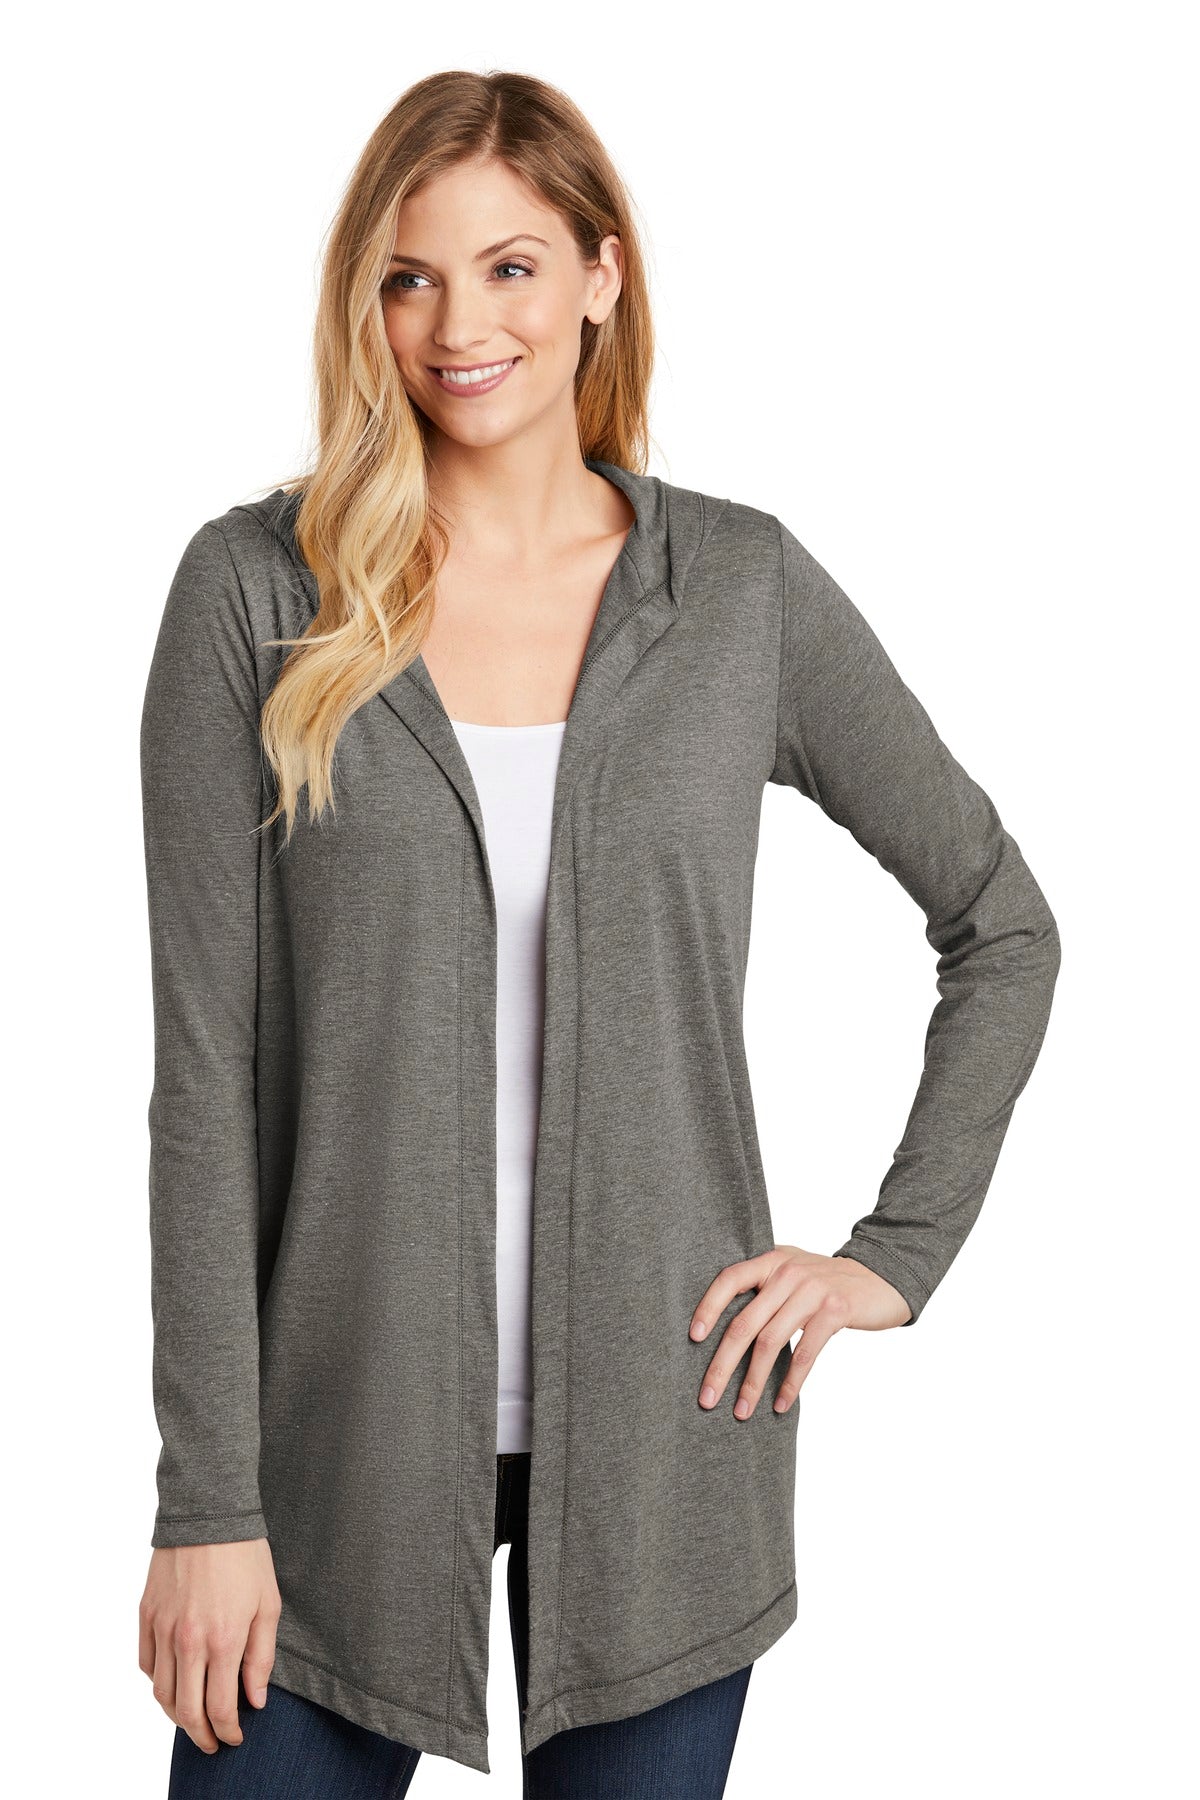 District ® Women's Perfect Tri ® Hooded Cardigan. DT156 - DFW Impression